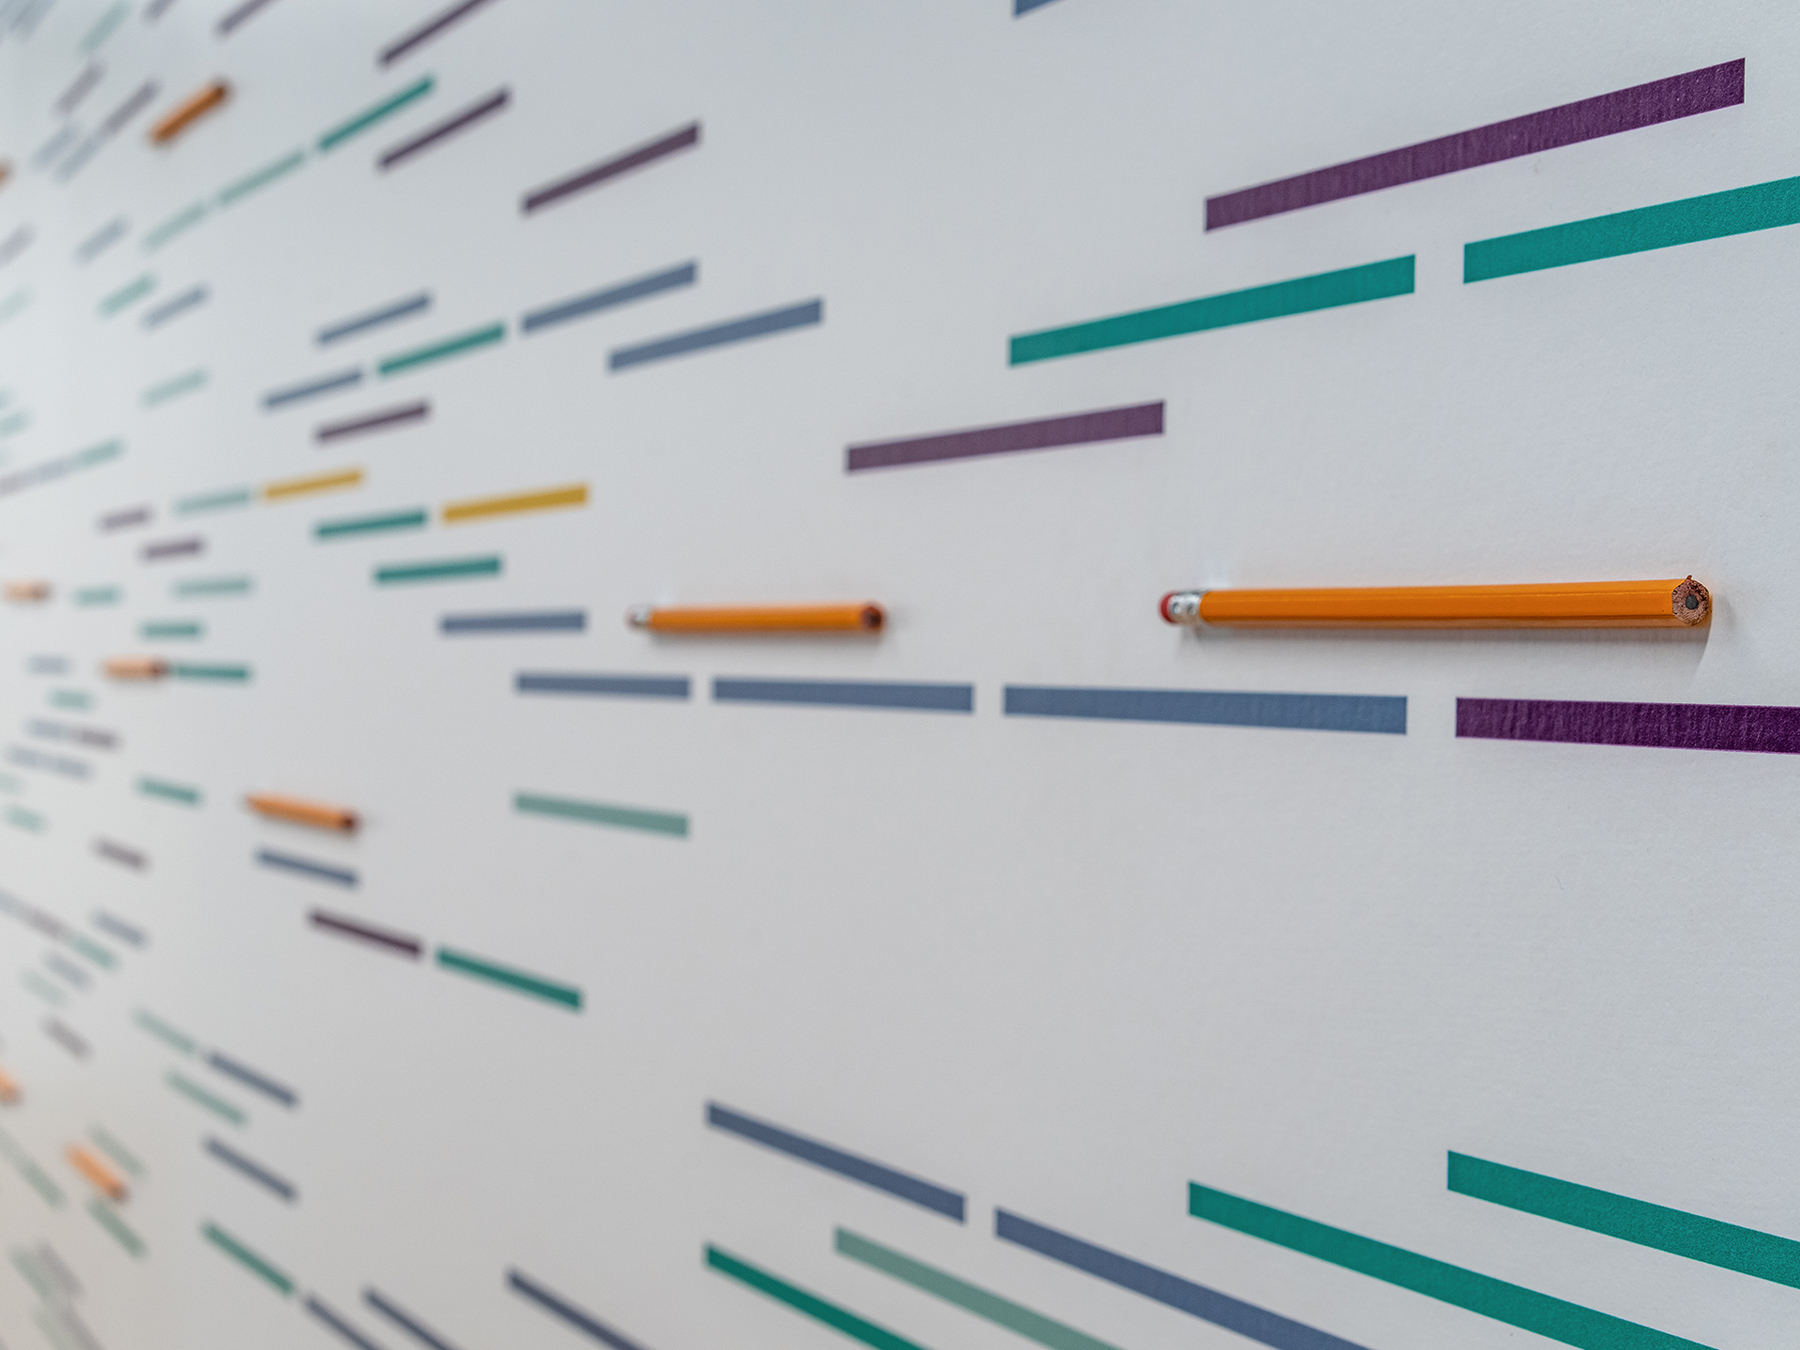 Detail photo of a wall graphic with colorful lines and dimensional pencils